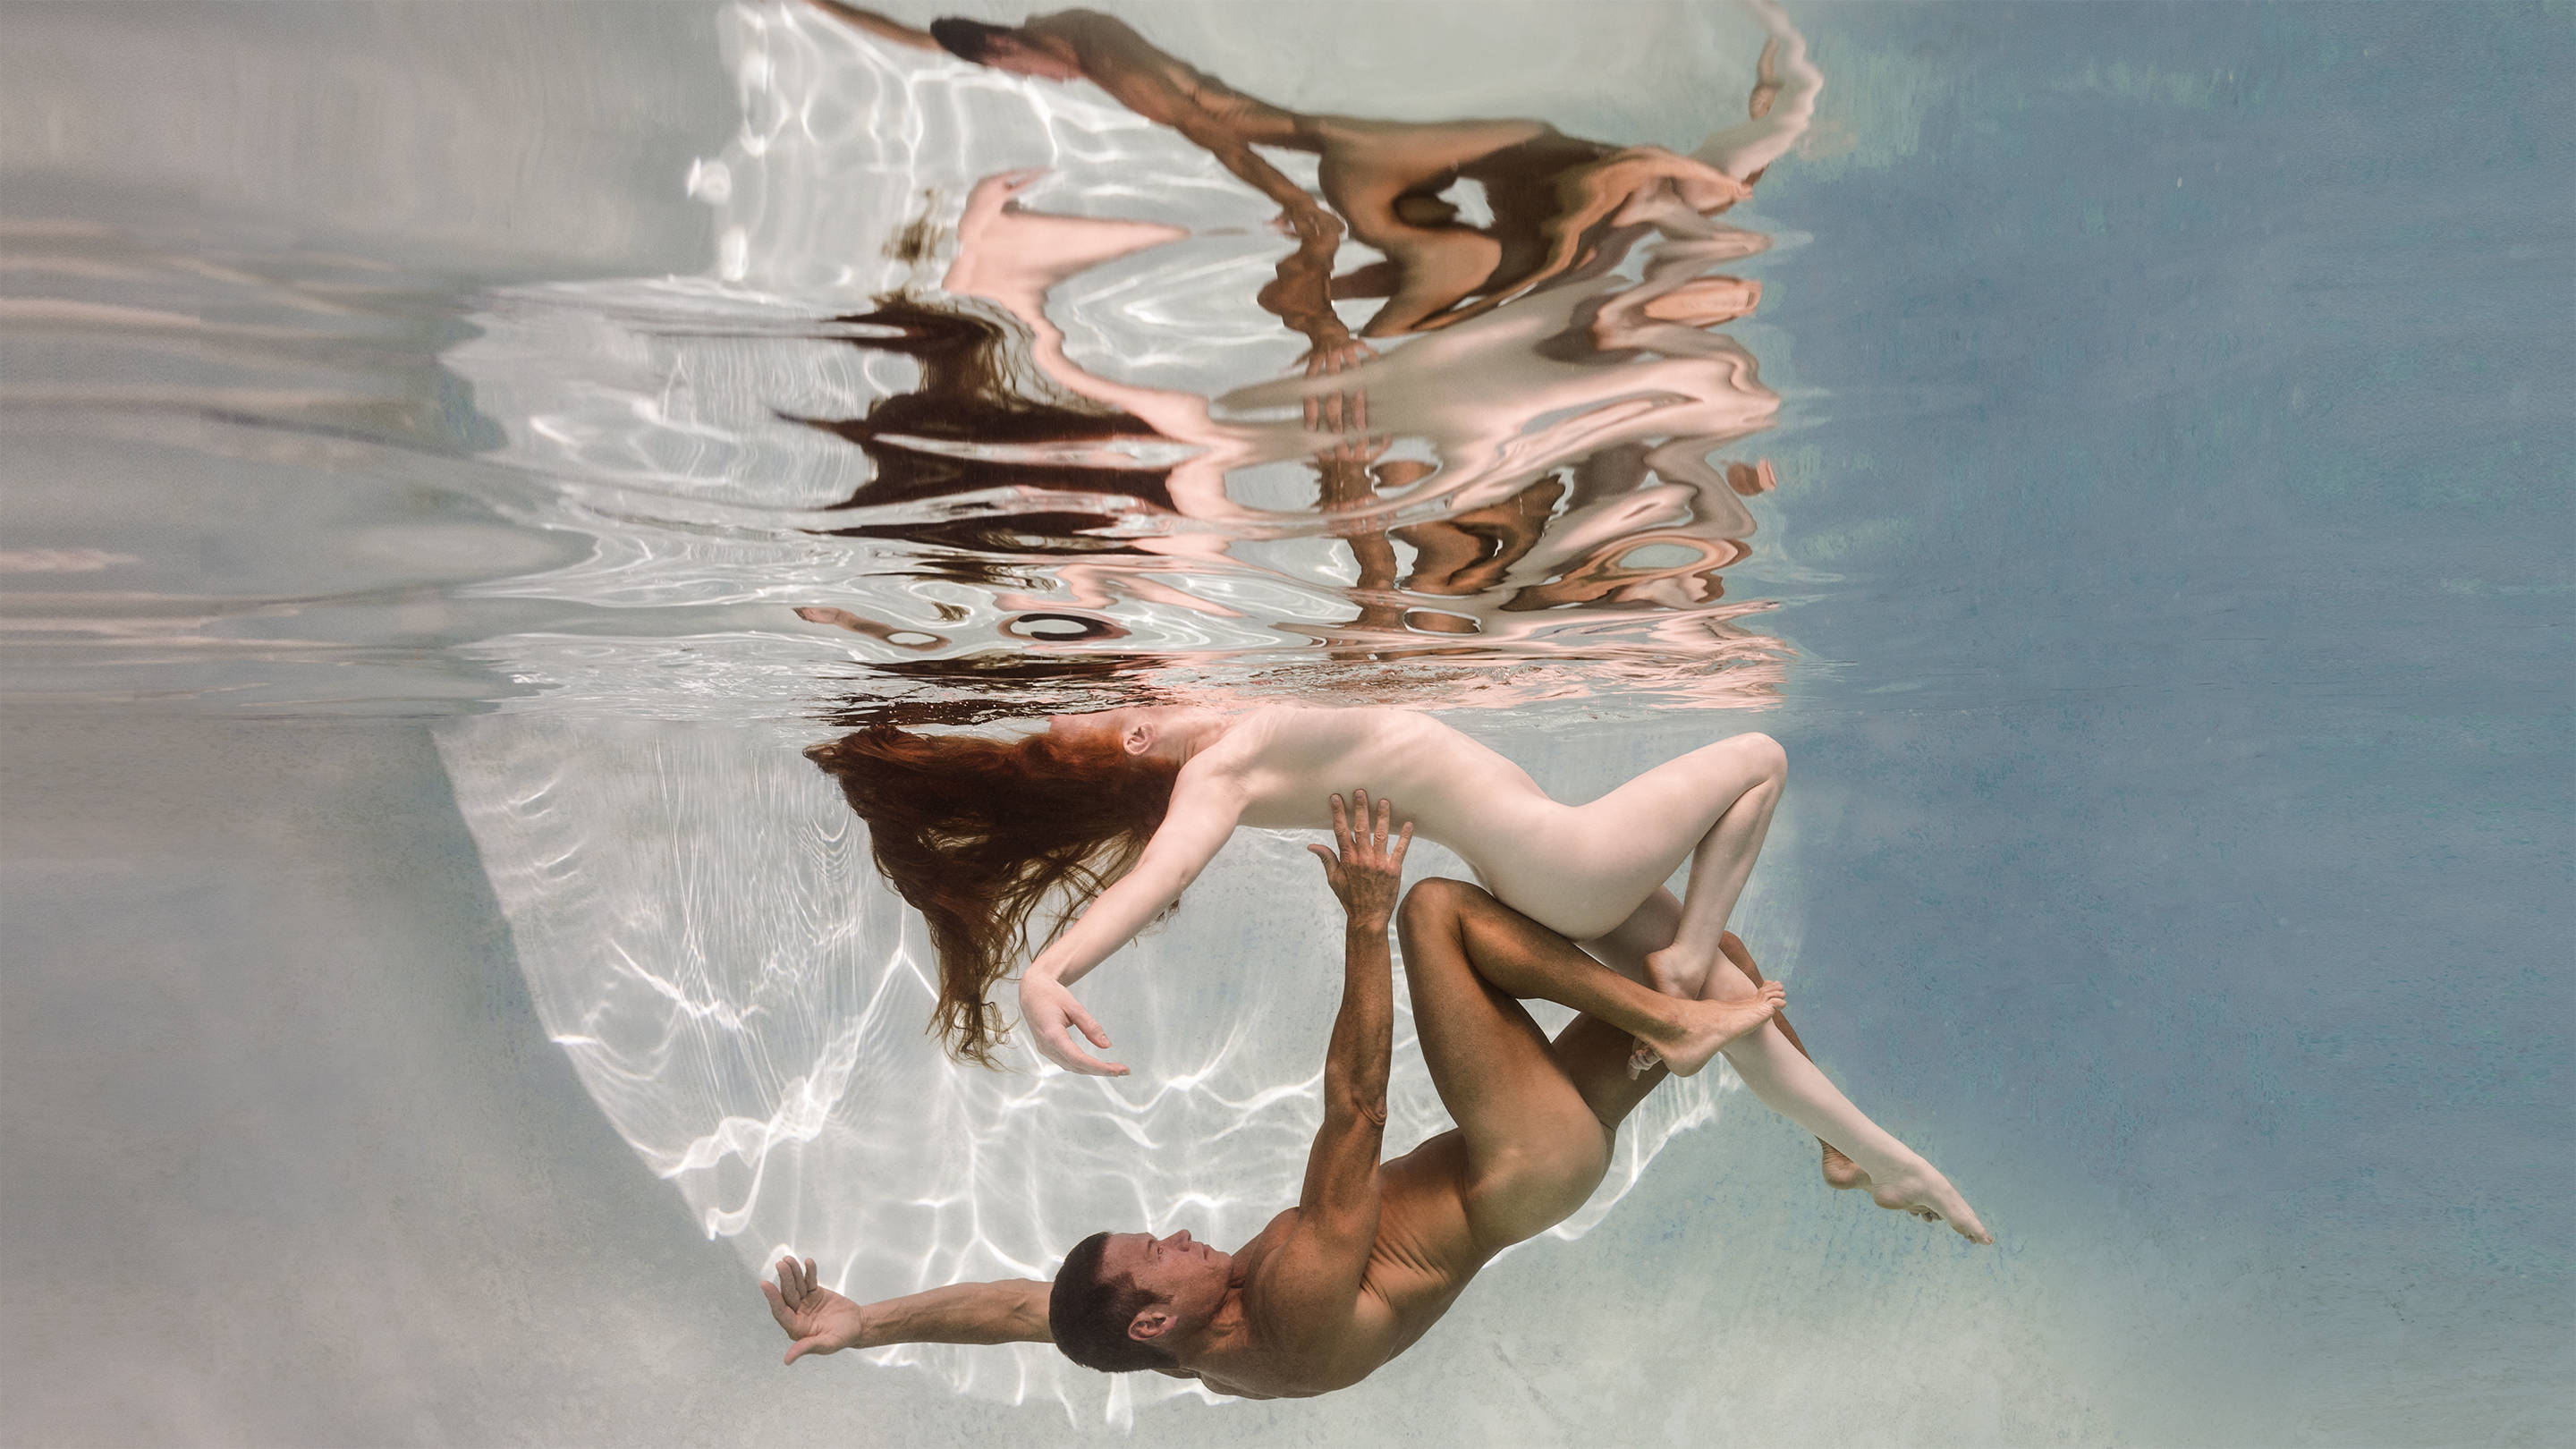 Playboy's Summer 2019 Gender and Sexuality issue shot by Ed Freeman